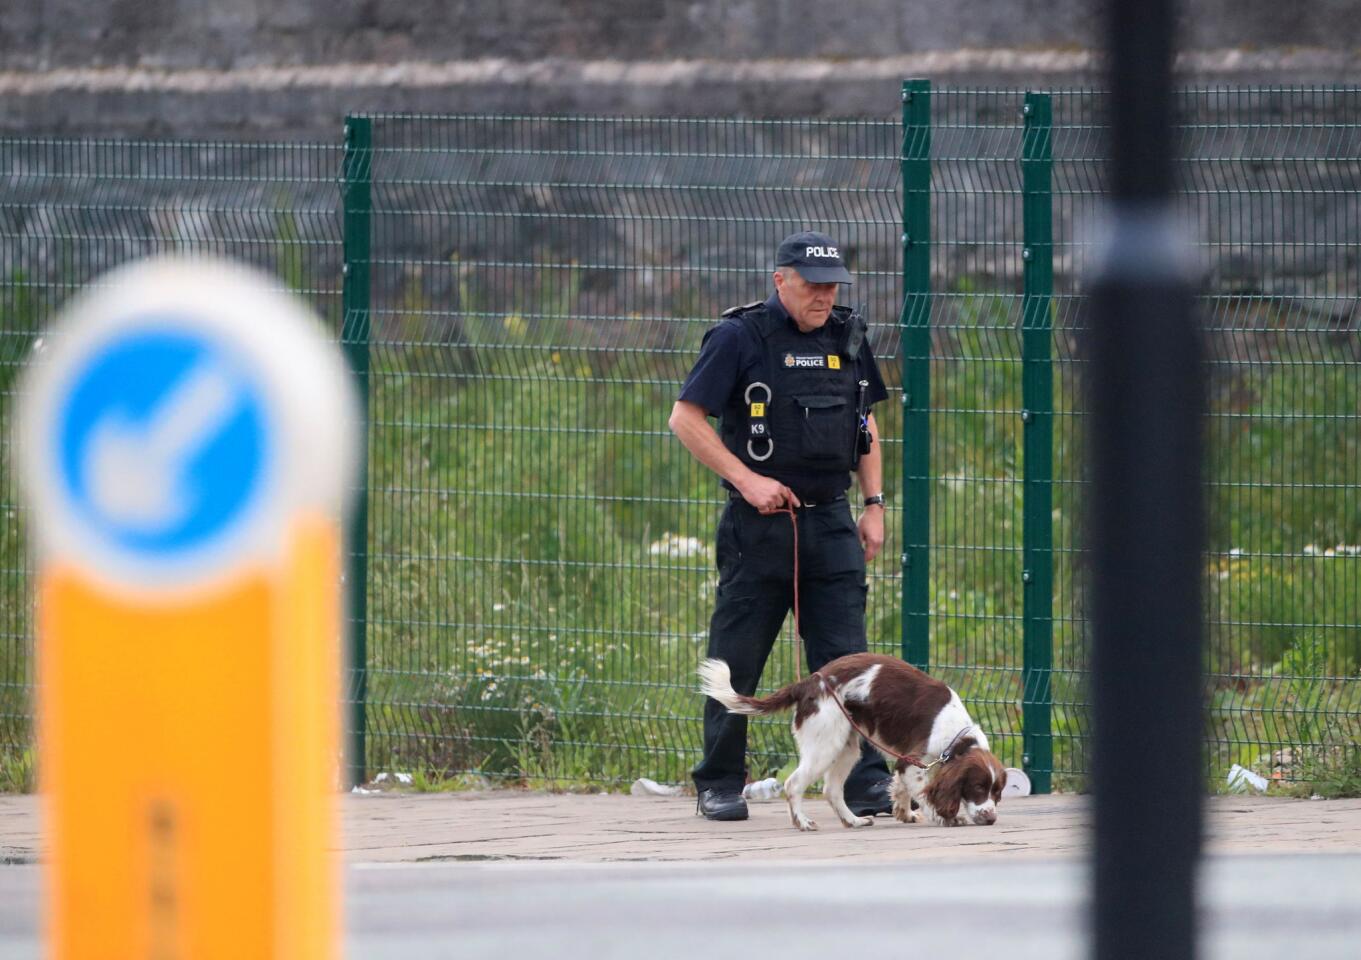 A police officer with a sniffer dog patrols near the Manchester Arena in Manchester, England, on May 23, 2017. An explosion struck an Ariana Grande concert attended by thousands of young music fans the previous night, killing 22 people.